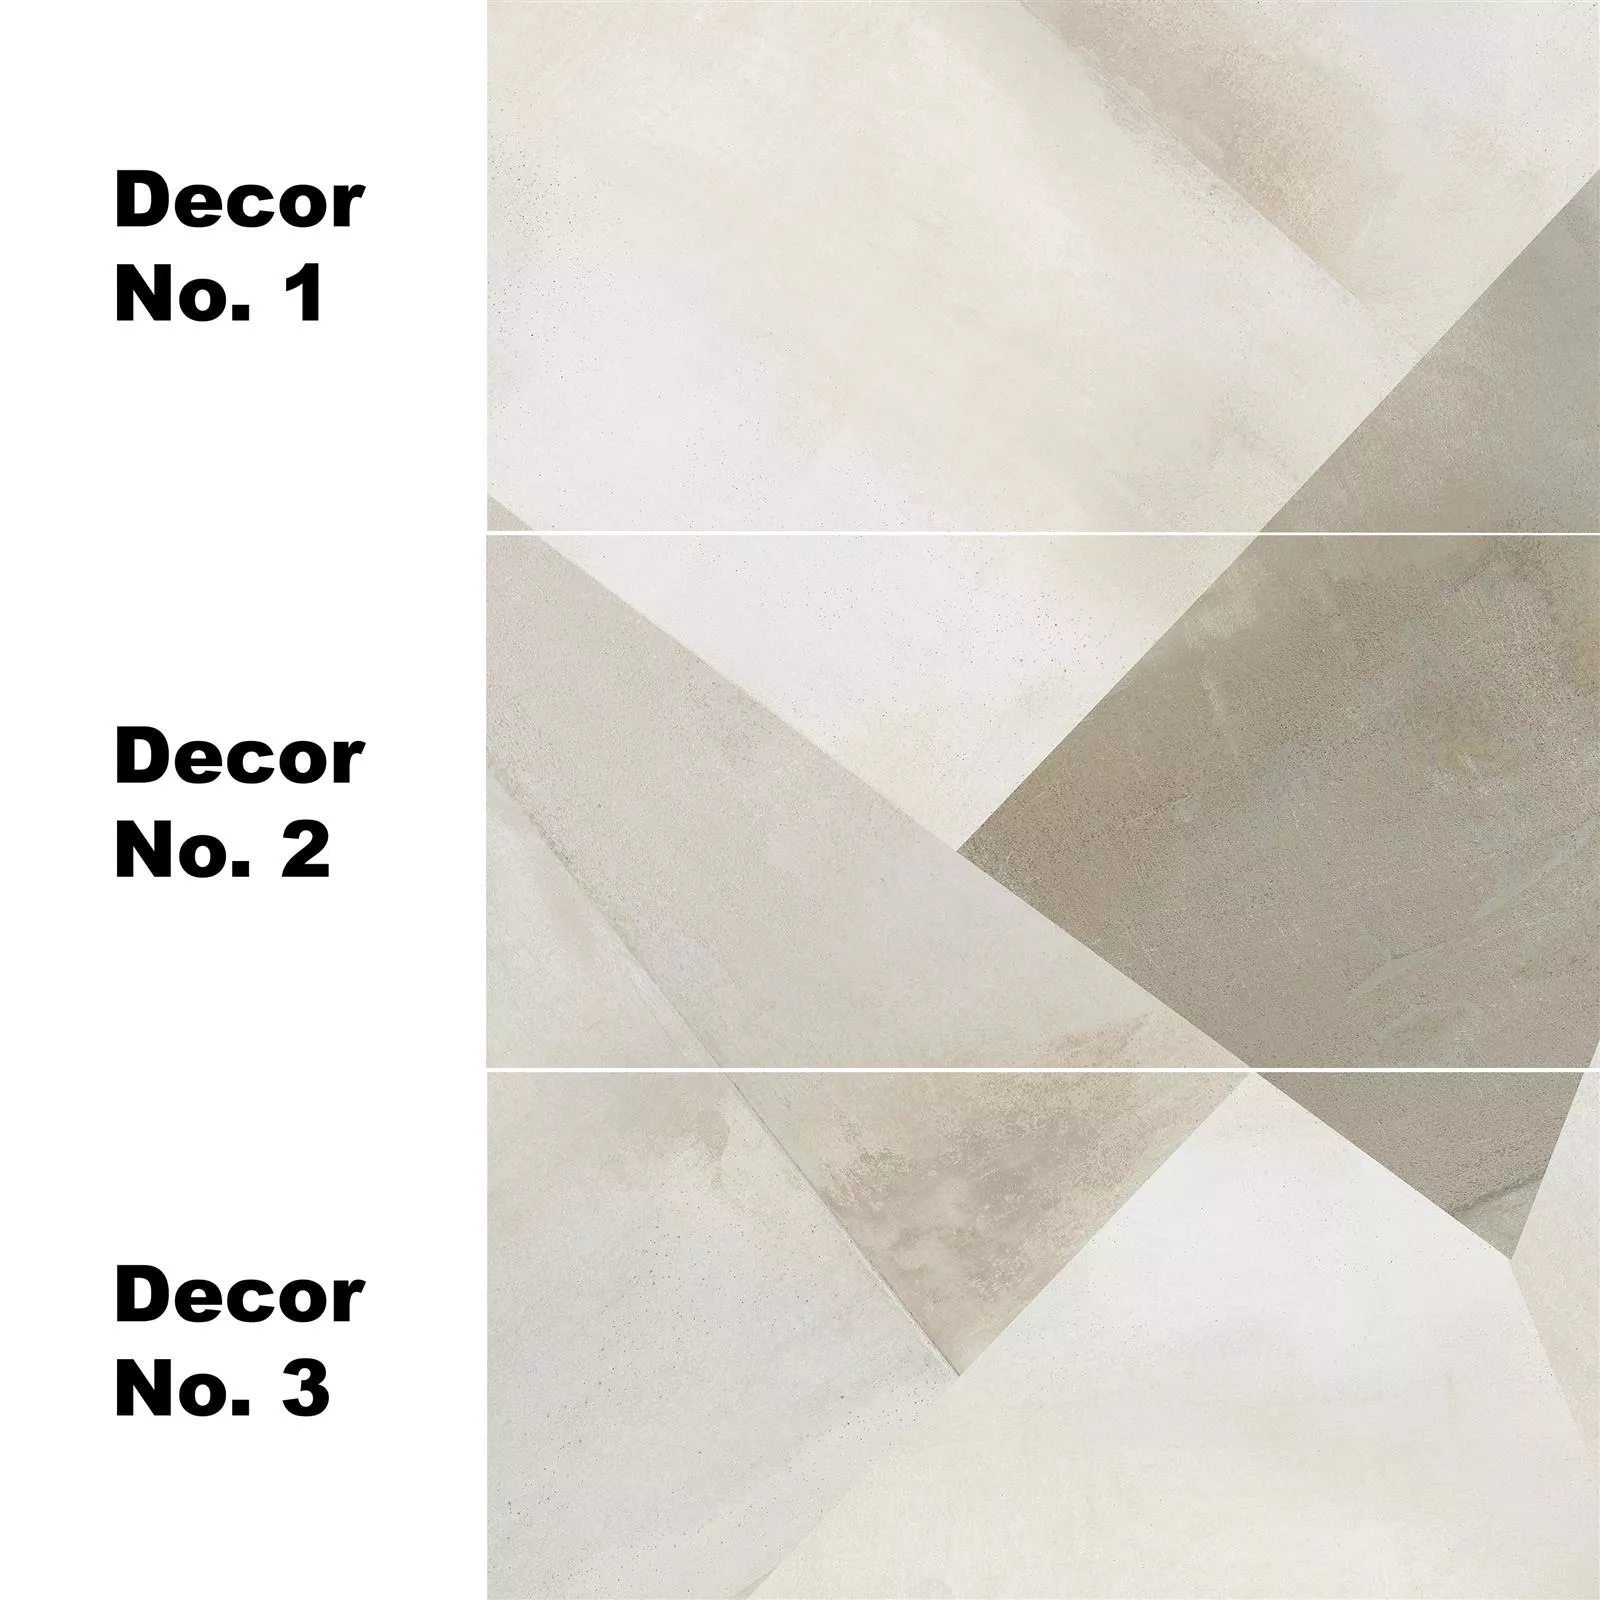 Wall Tiles Queens Rectified Sand Decor 1 30x60cm